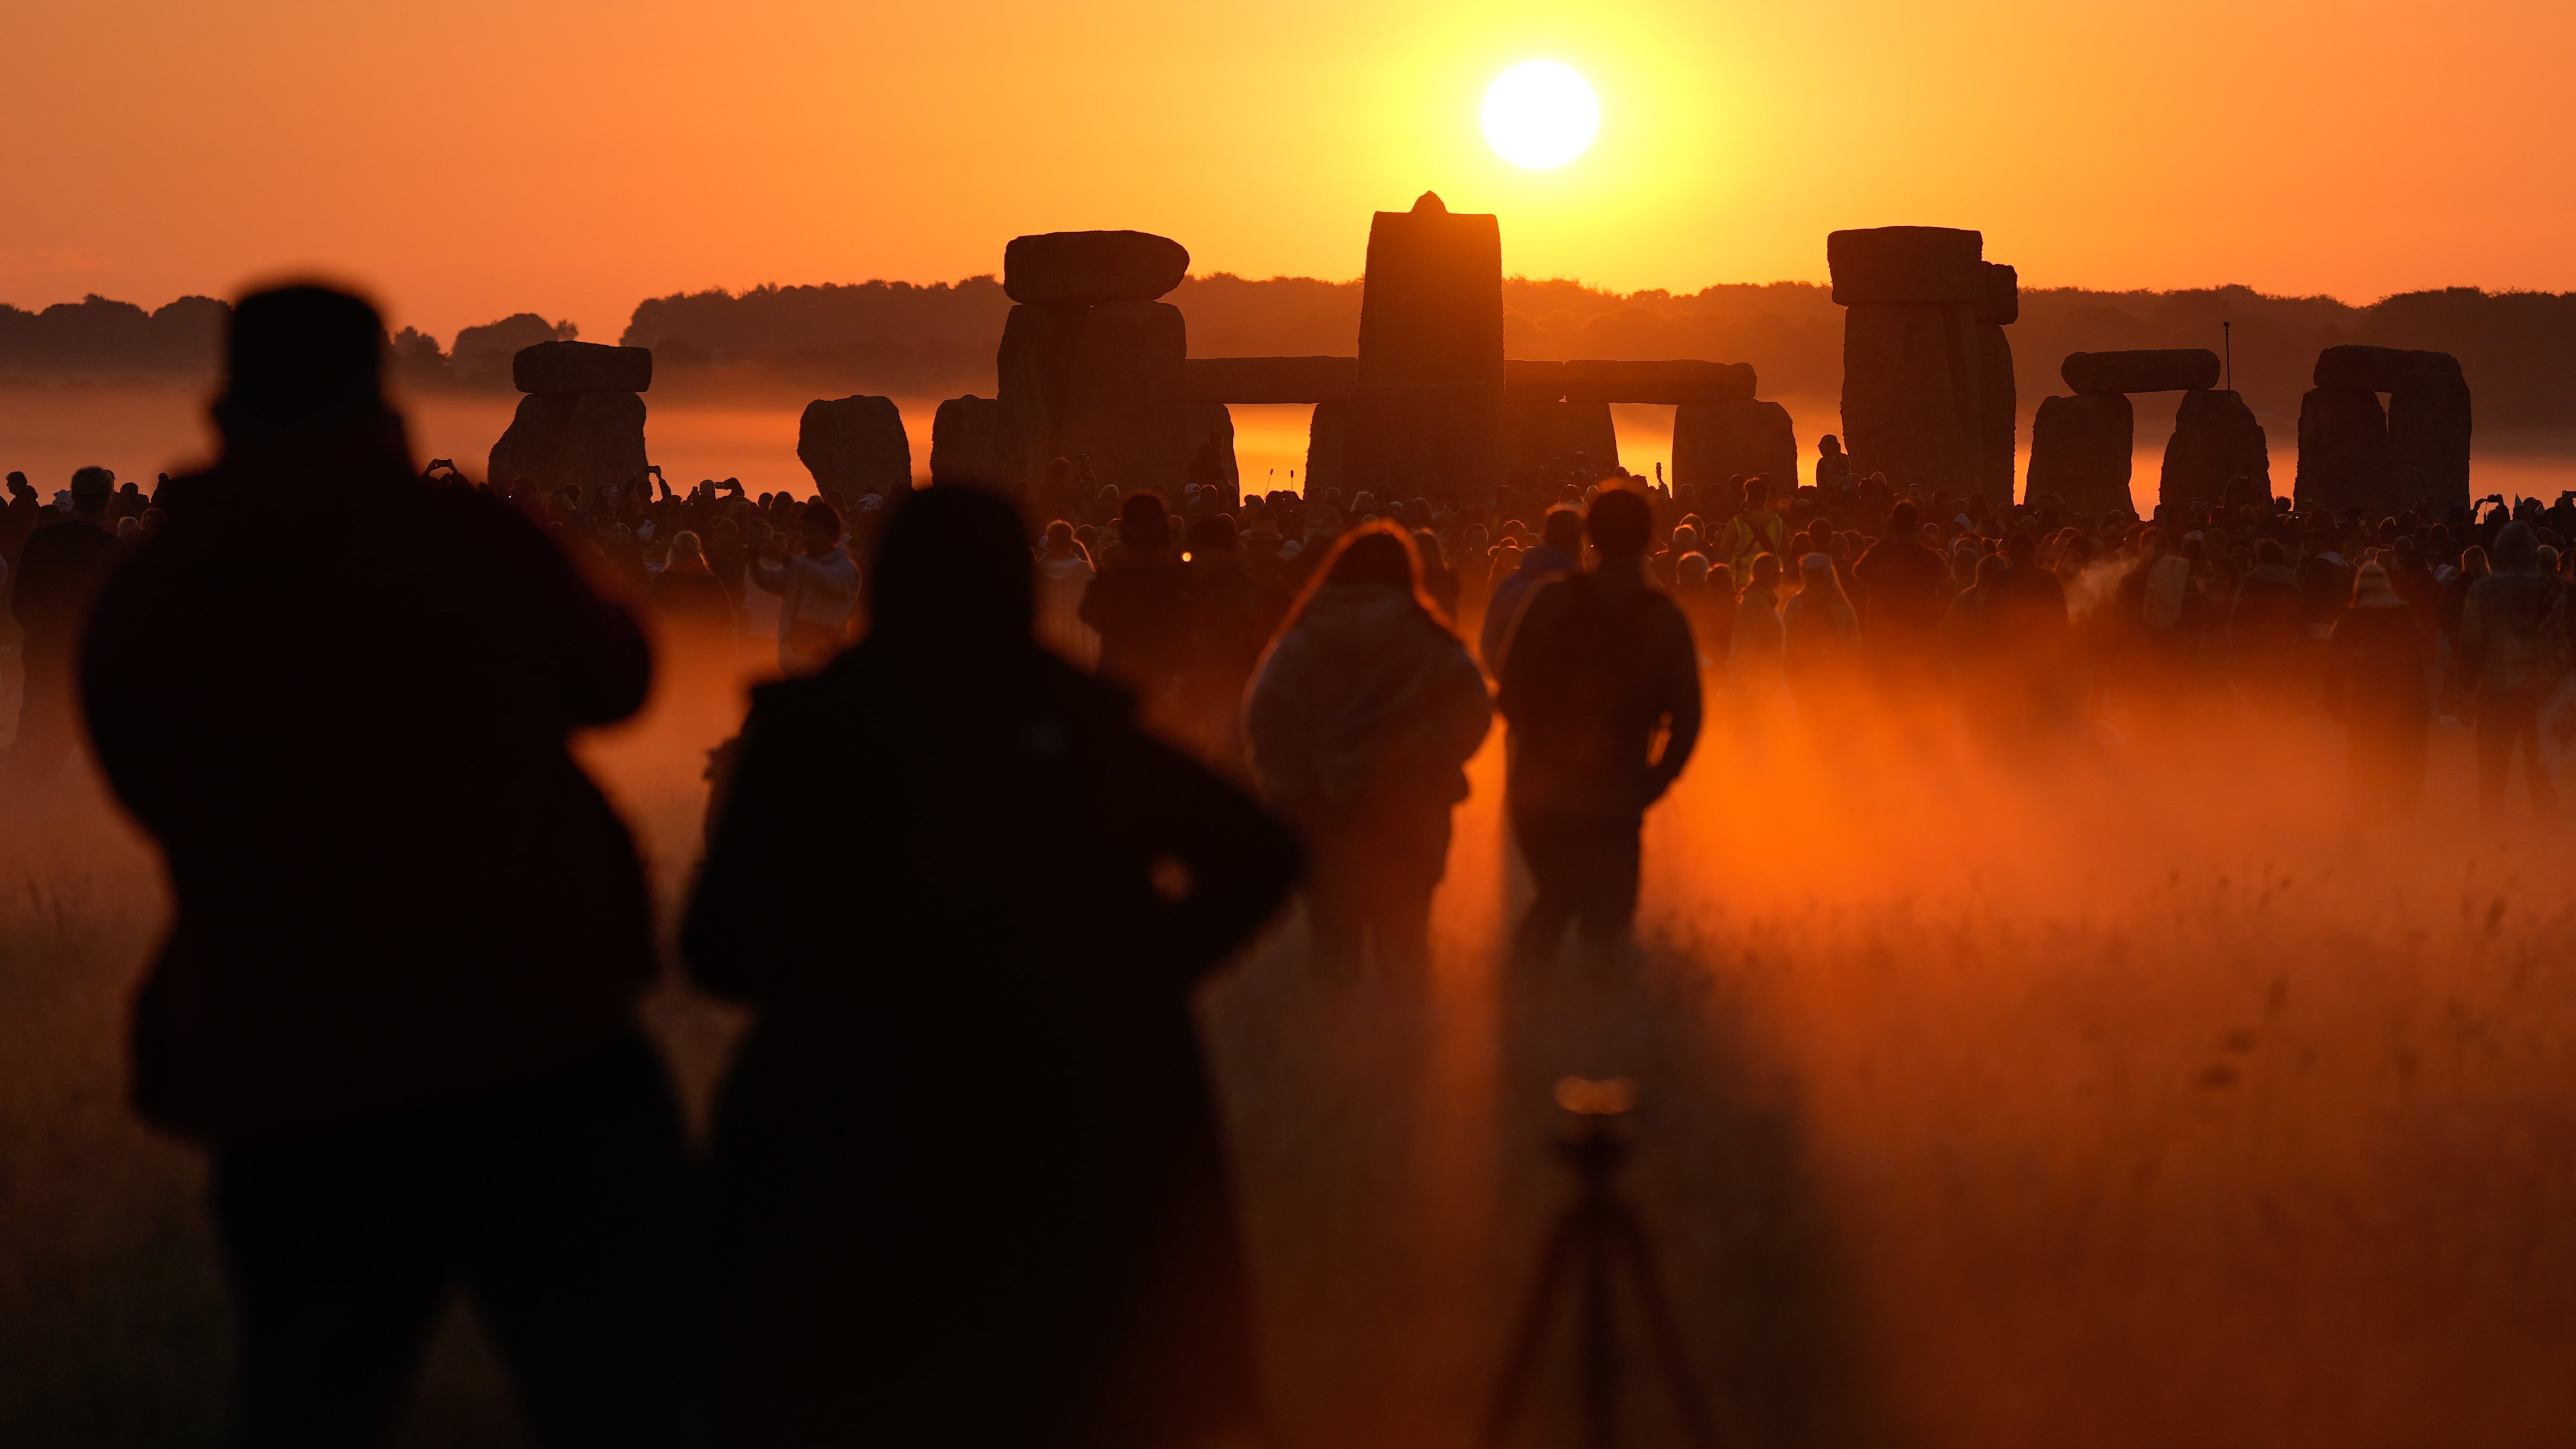 The summer solstice is one of the few opportunities people have to be close to the stones